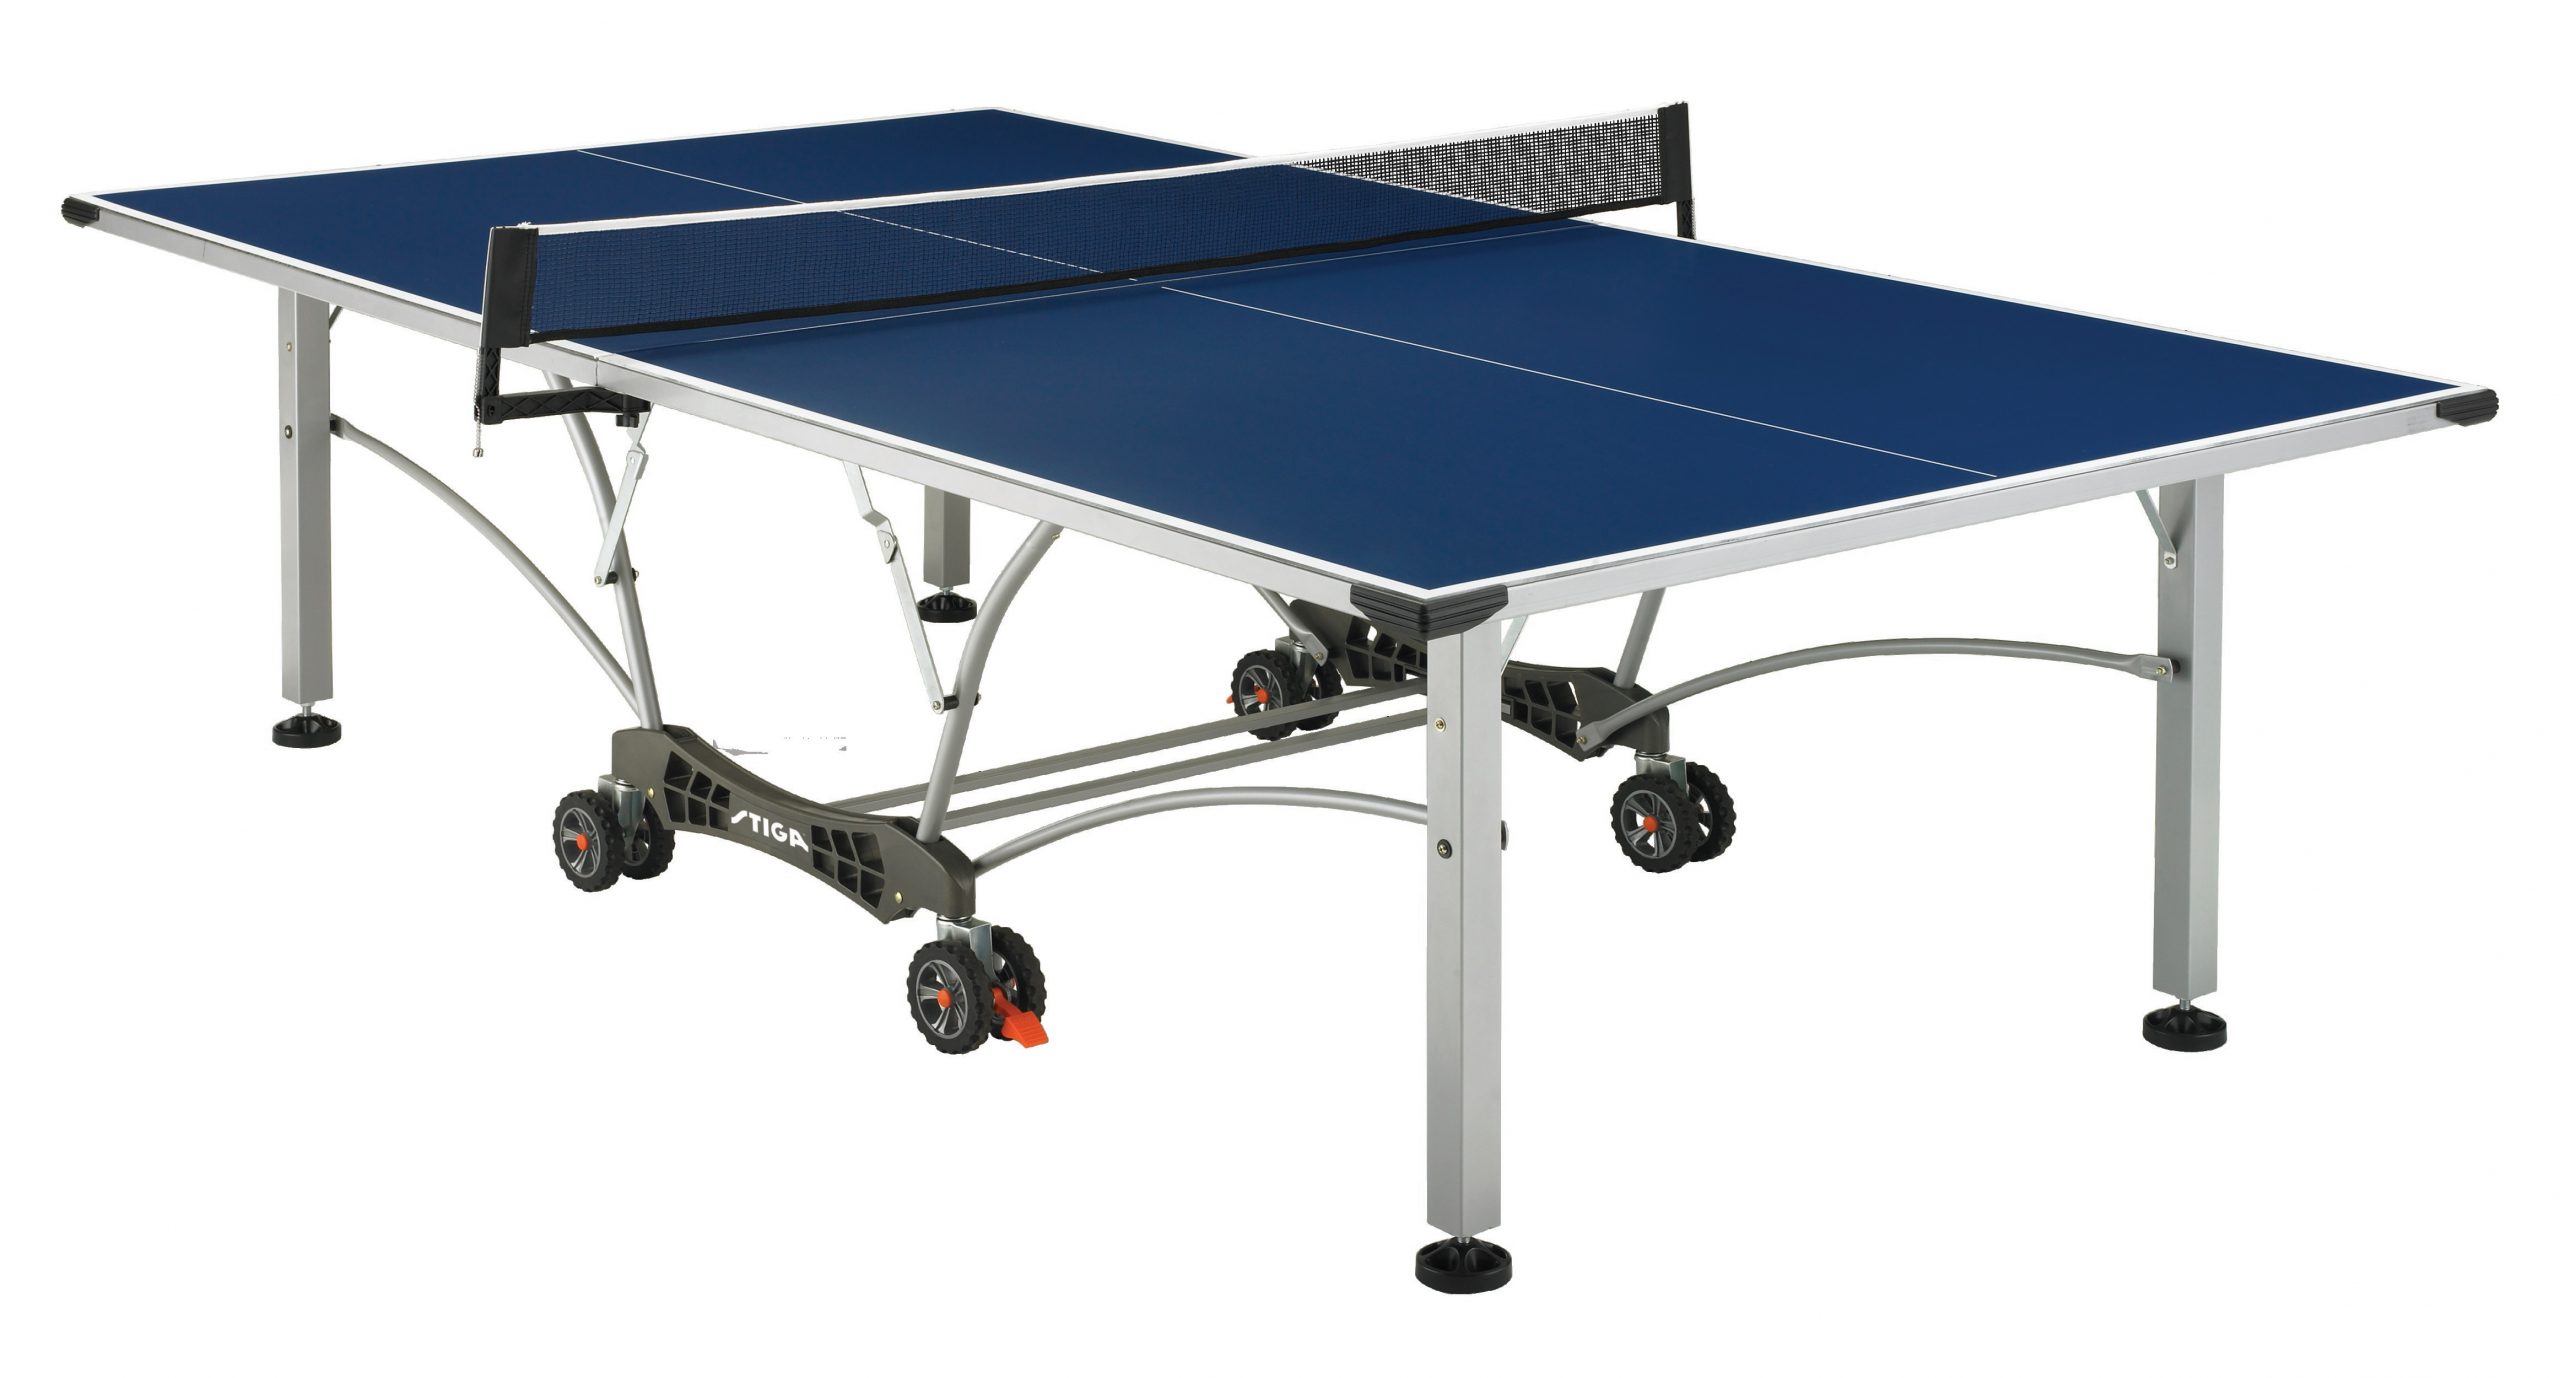 Sharplace Couverture de Ping Pong Table Stockage Tennis Table Feuille Interieure Protection